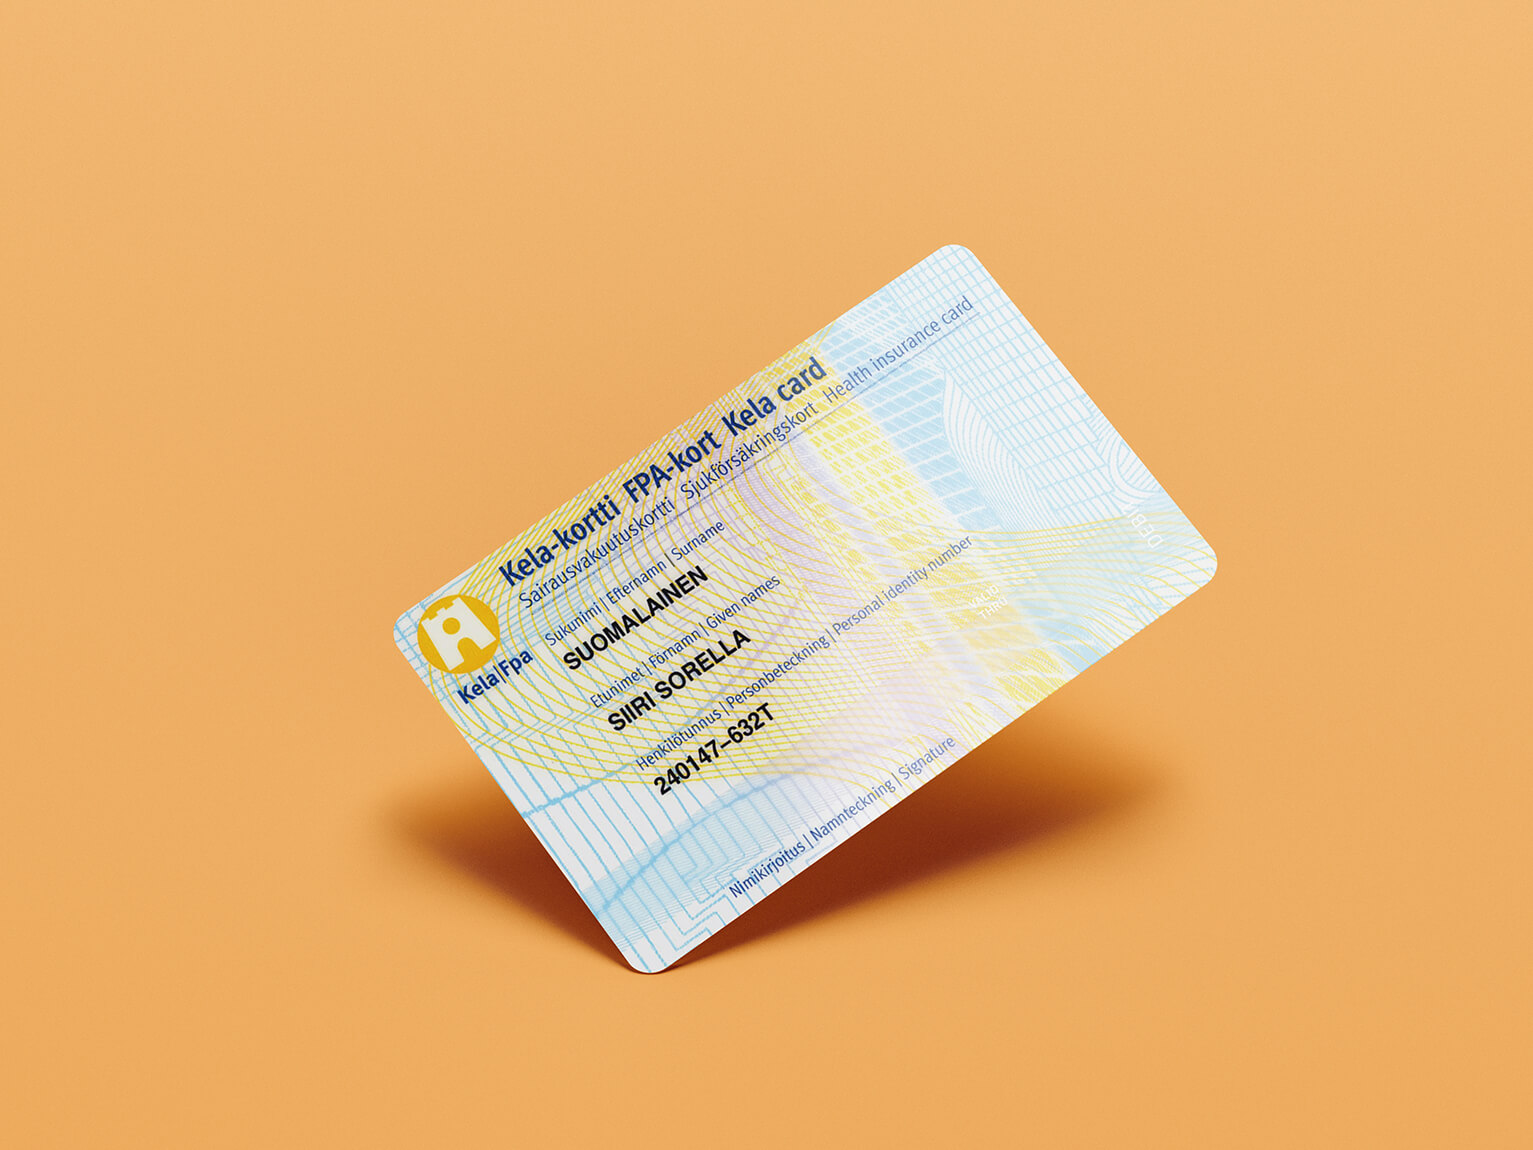 A plastic card with personal information.